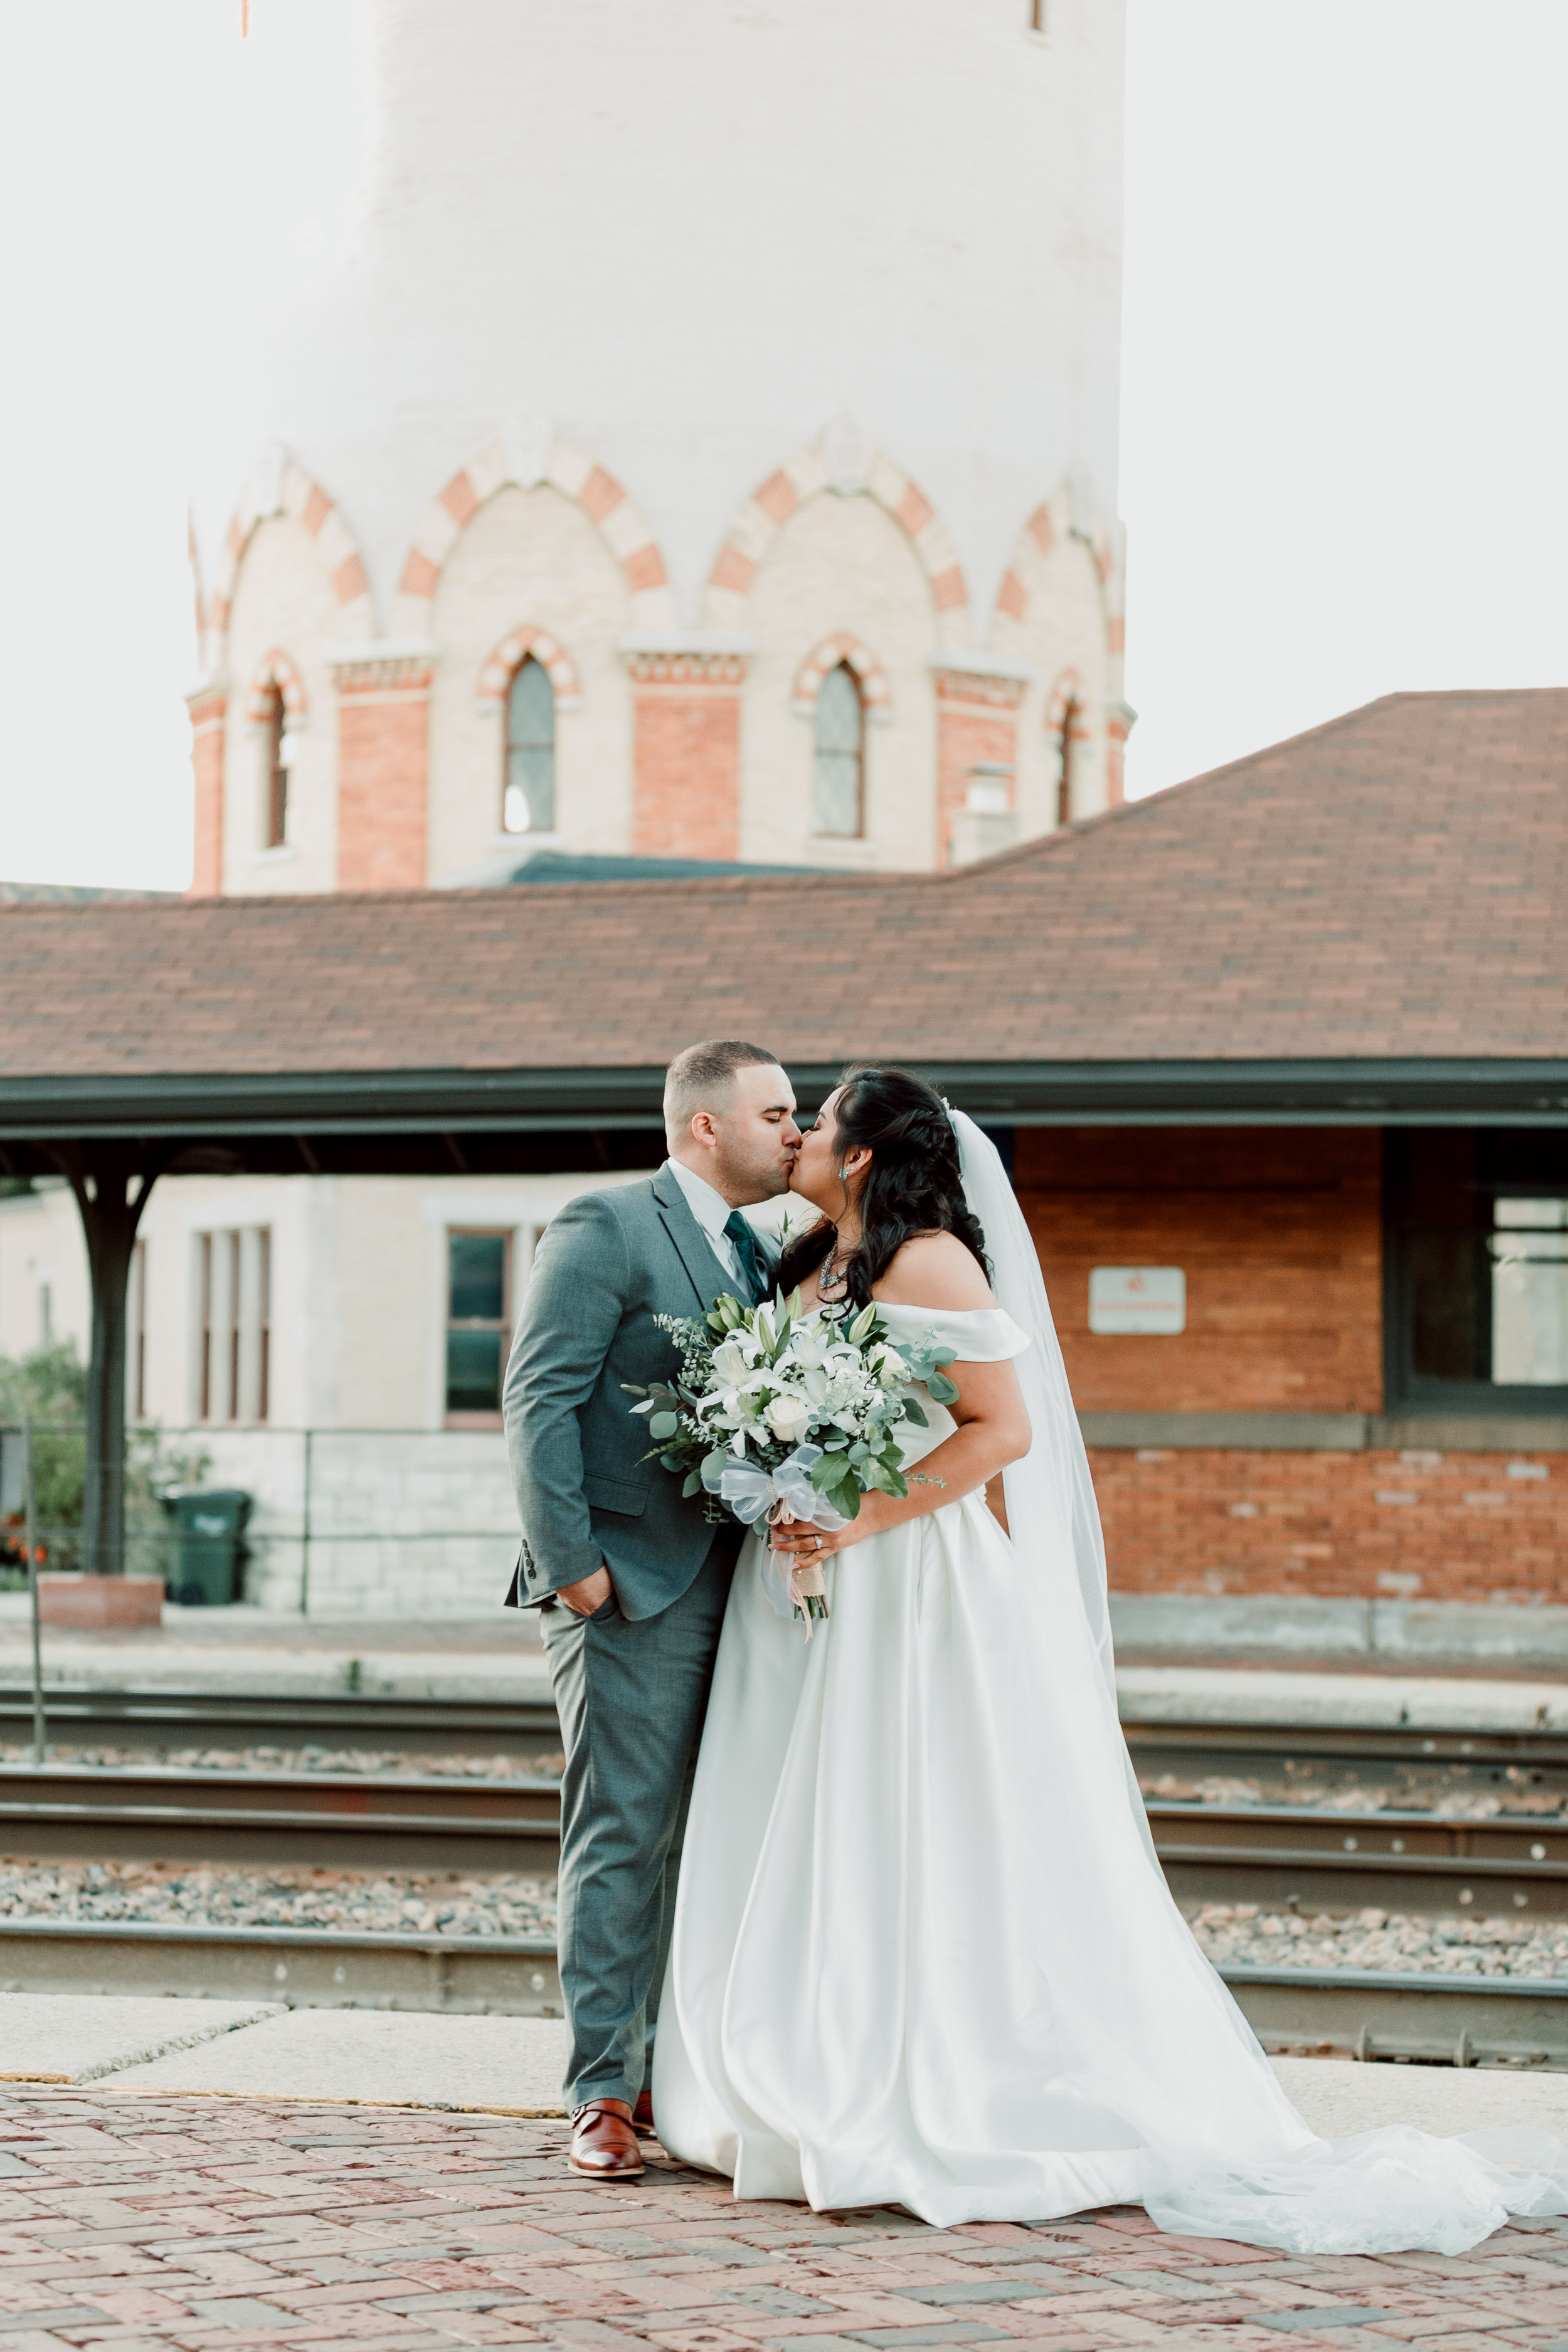 Downtown Riverside Wedding Portraits | Backyard Chicago Wedding | Emotional Chicago Wedding | Historic Downtown Riverside Wedding Photos | Chicago Wedding Photographer | Metra Station Wedding Photos | Small Weddings in Chicago | Intimate Elopements in Chicago